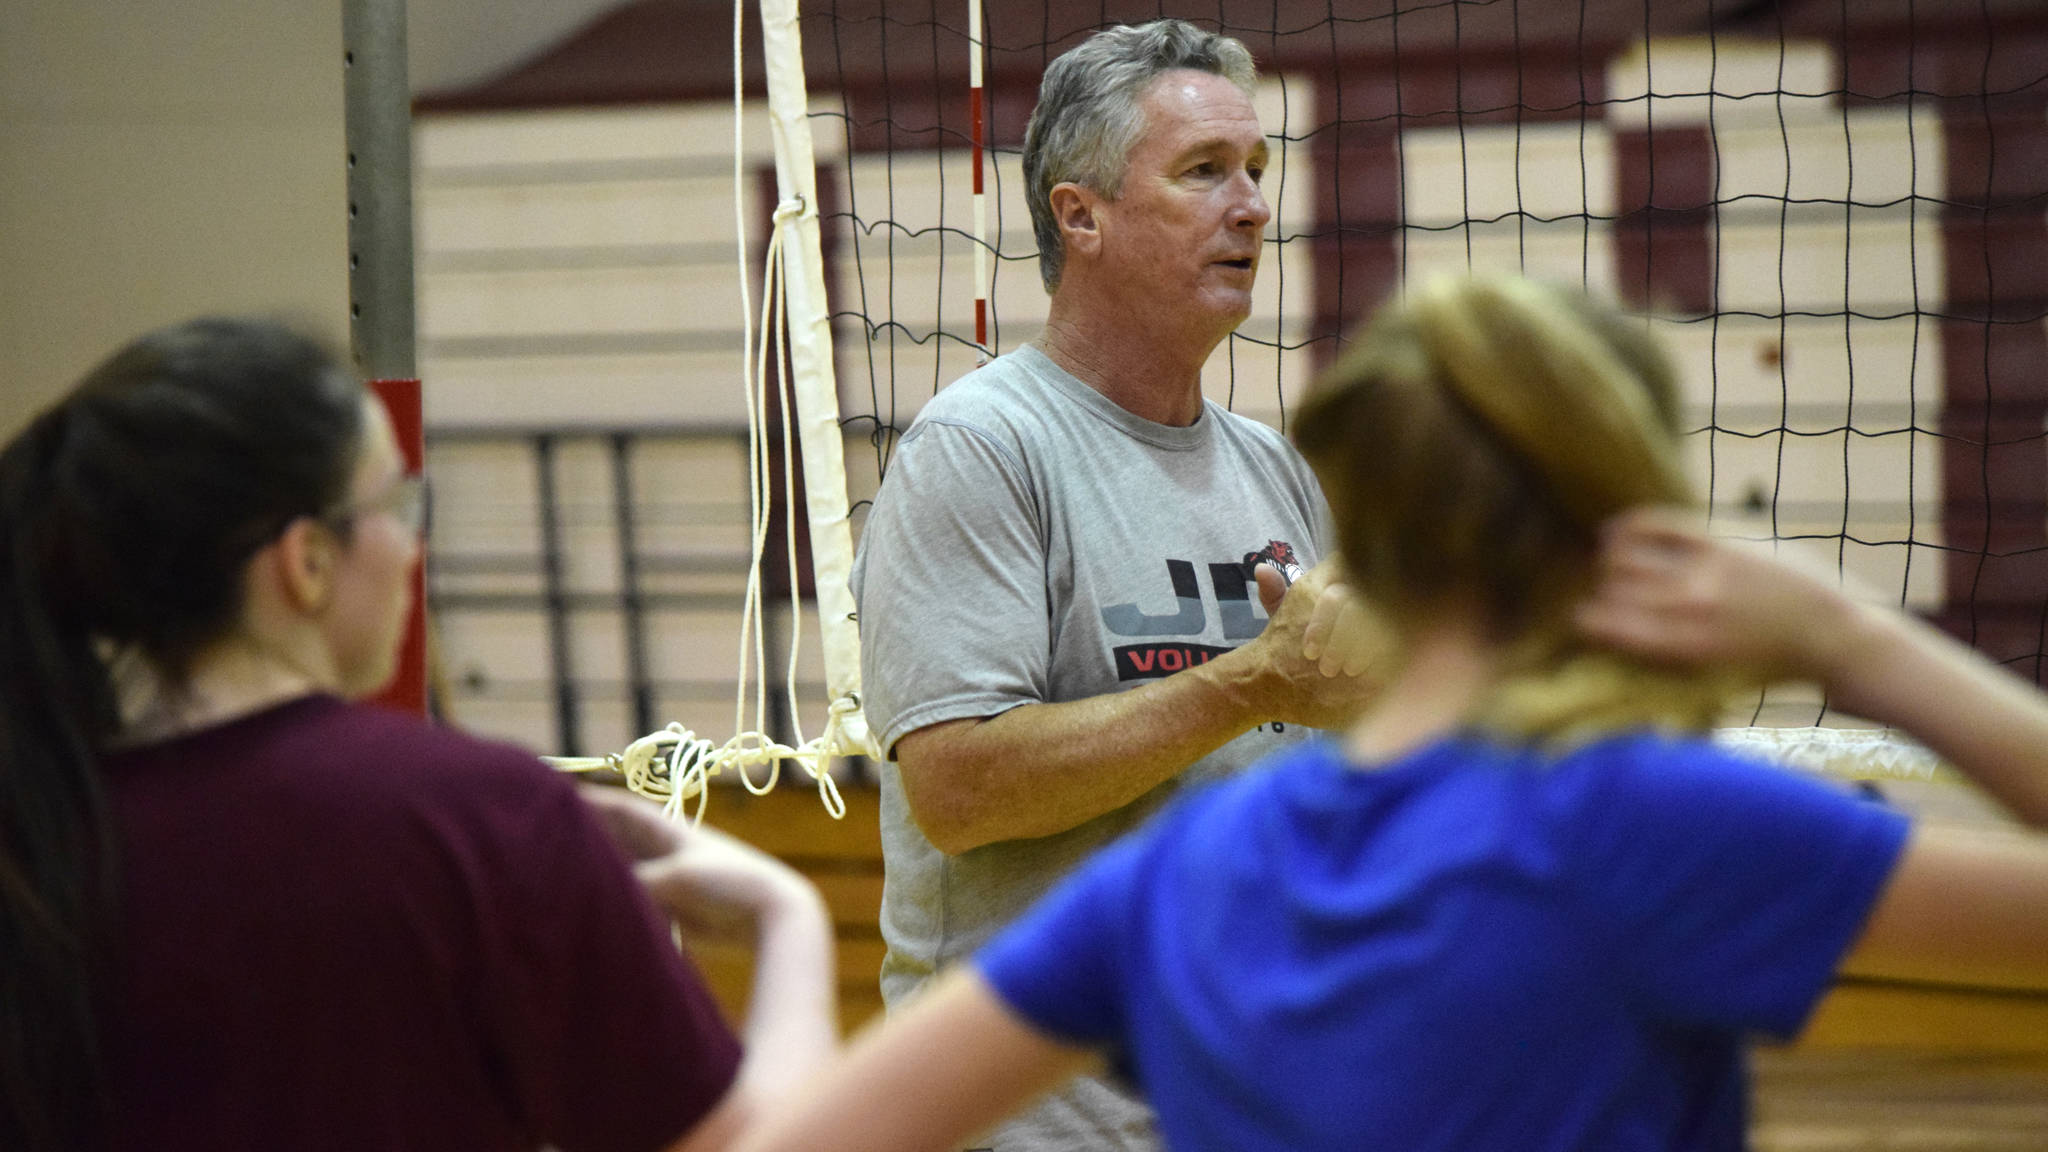 Juneau-Douglas High School assistant volleyball coach Dale Bontrager speaks at practice last season. Bontrager retired from coaching volleyball at the beginning of the season. (Nolin Ainsworth | Juneau Empire File)